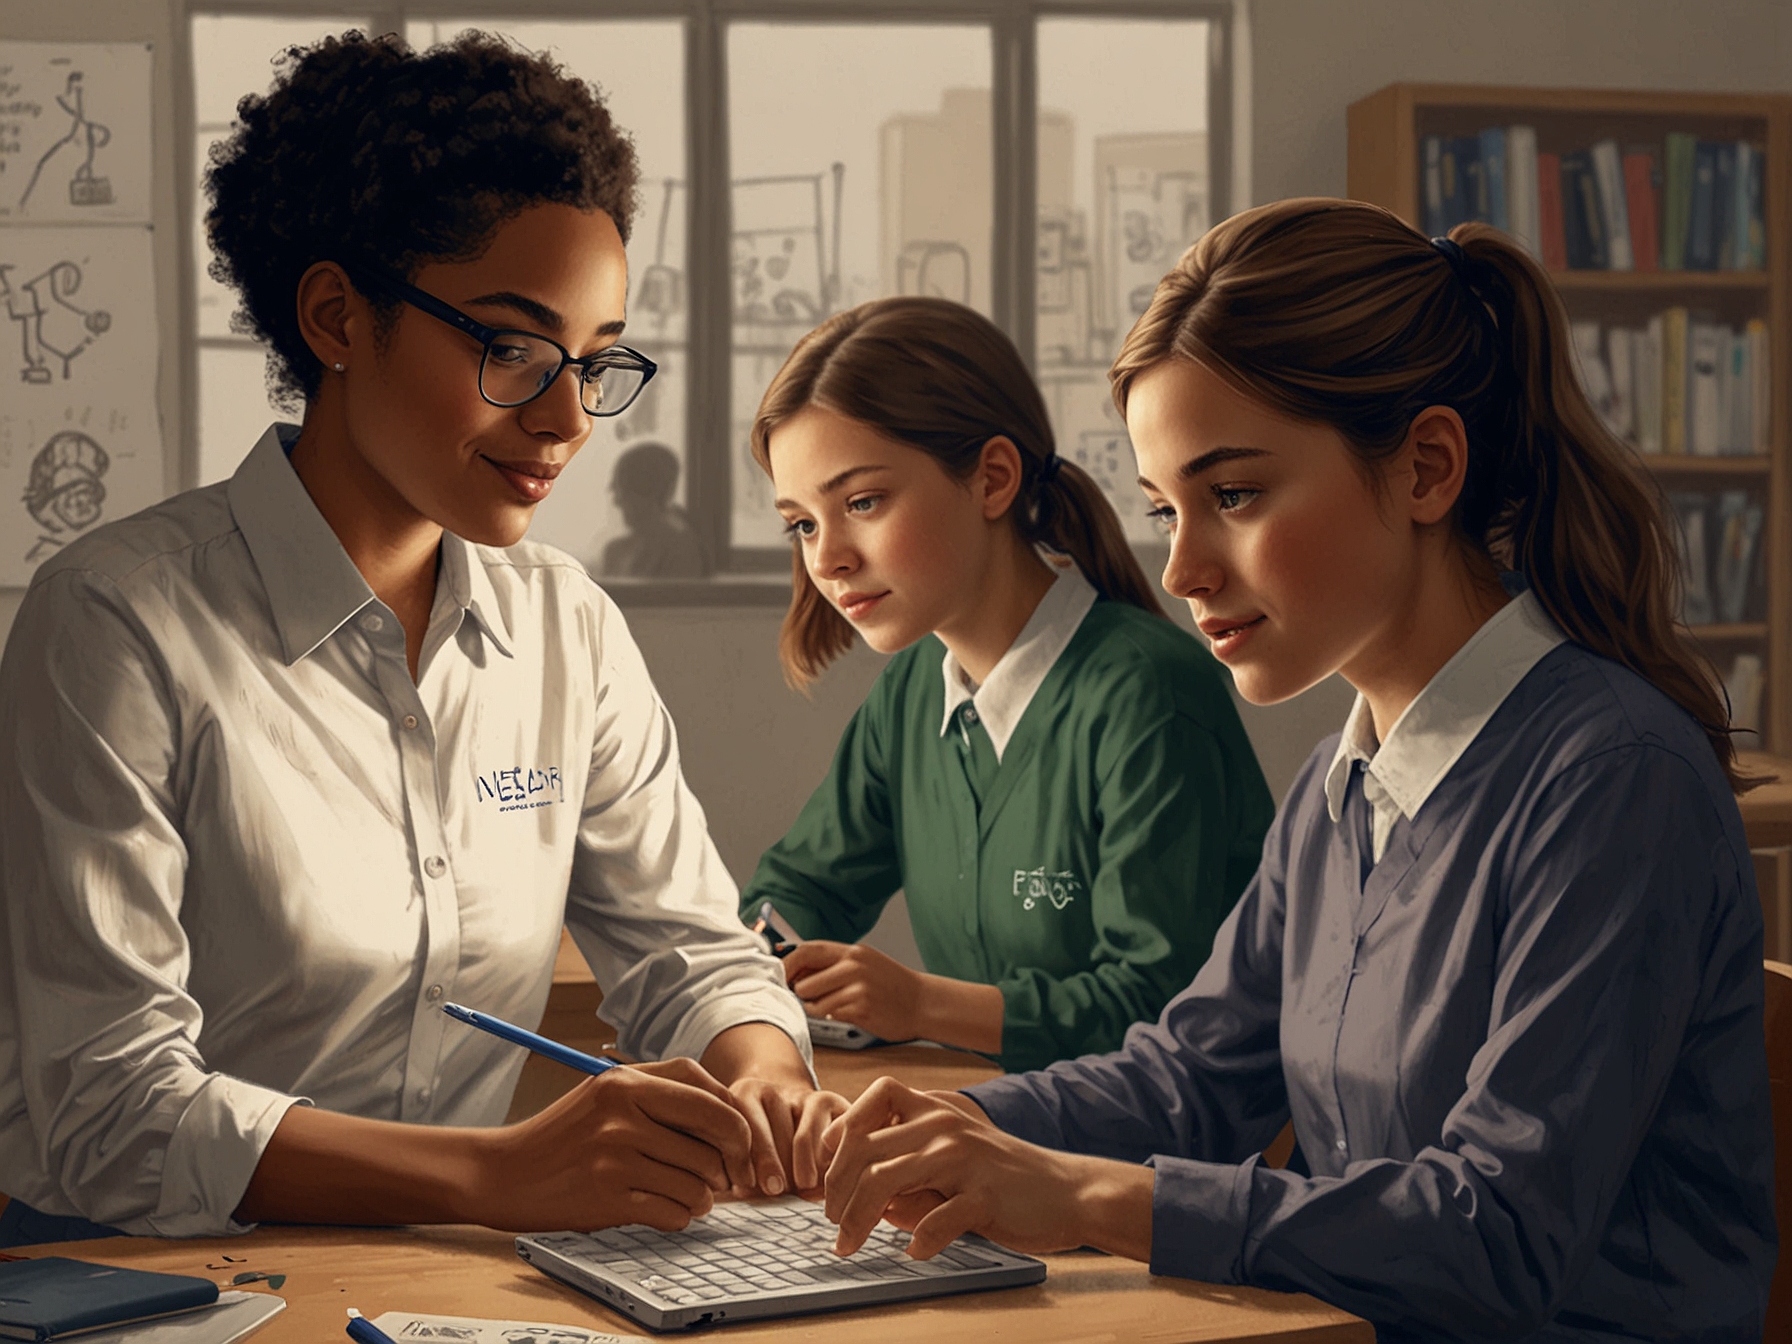 A scene showing AI in education, with personalized learning experiences on digital devices catering to students' individual needs, demonstrating inclusivity and effectiveness.